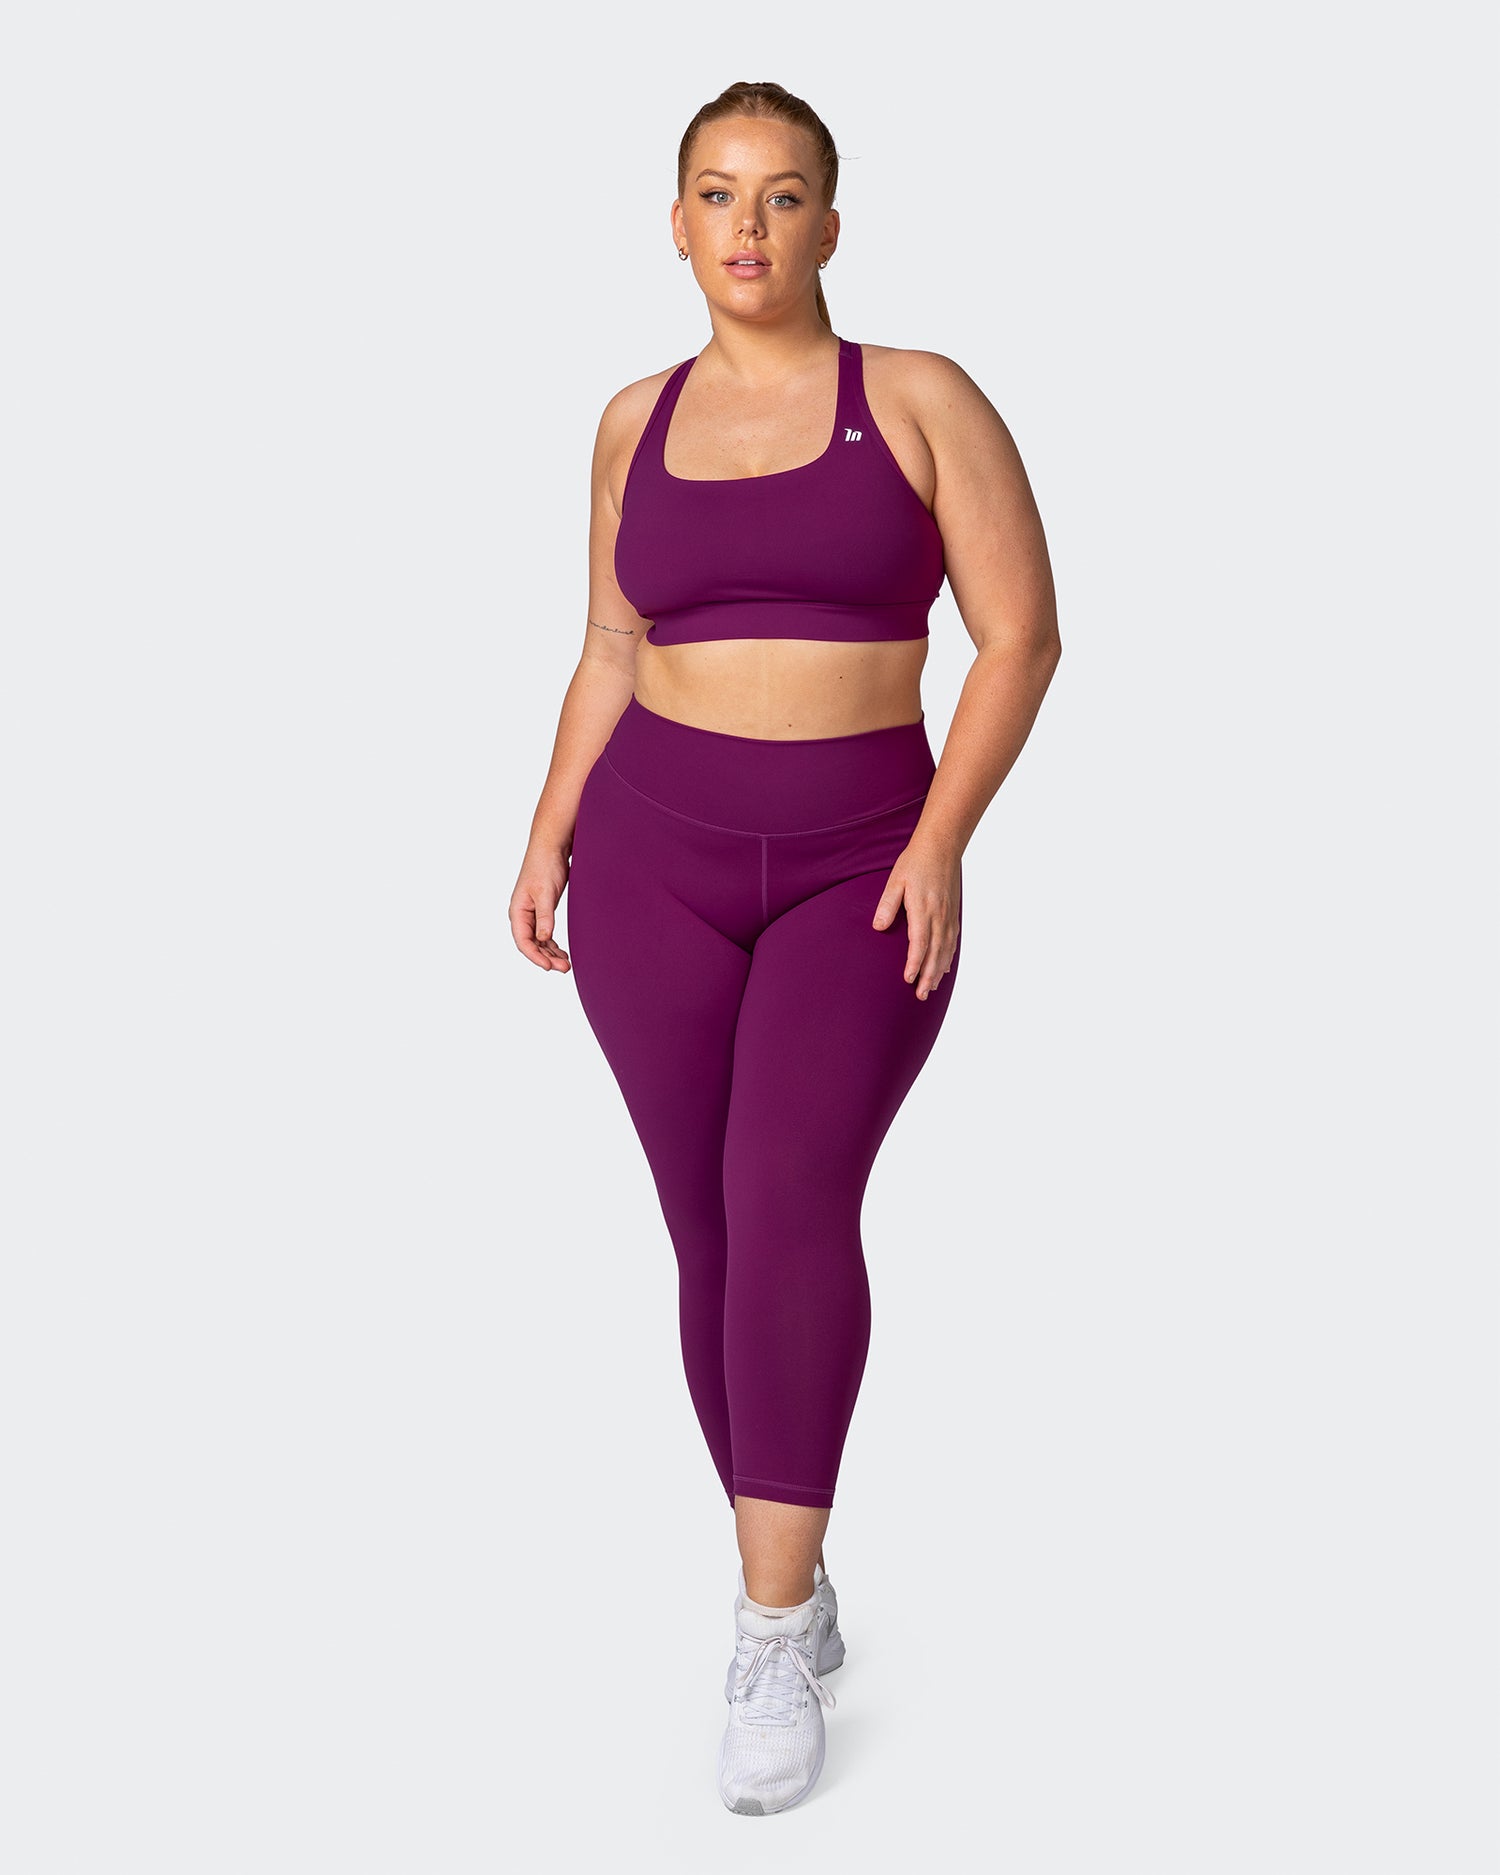 Signature Scrunch 7/8 Leggings - Huckleberry - Muscle Nation